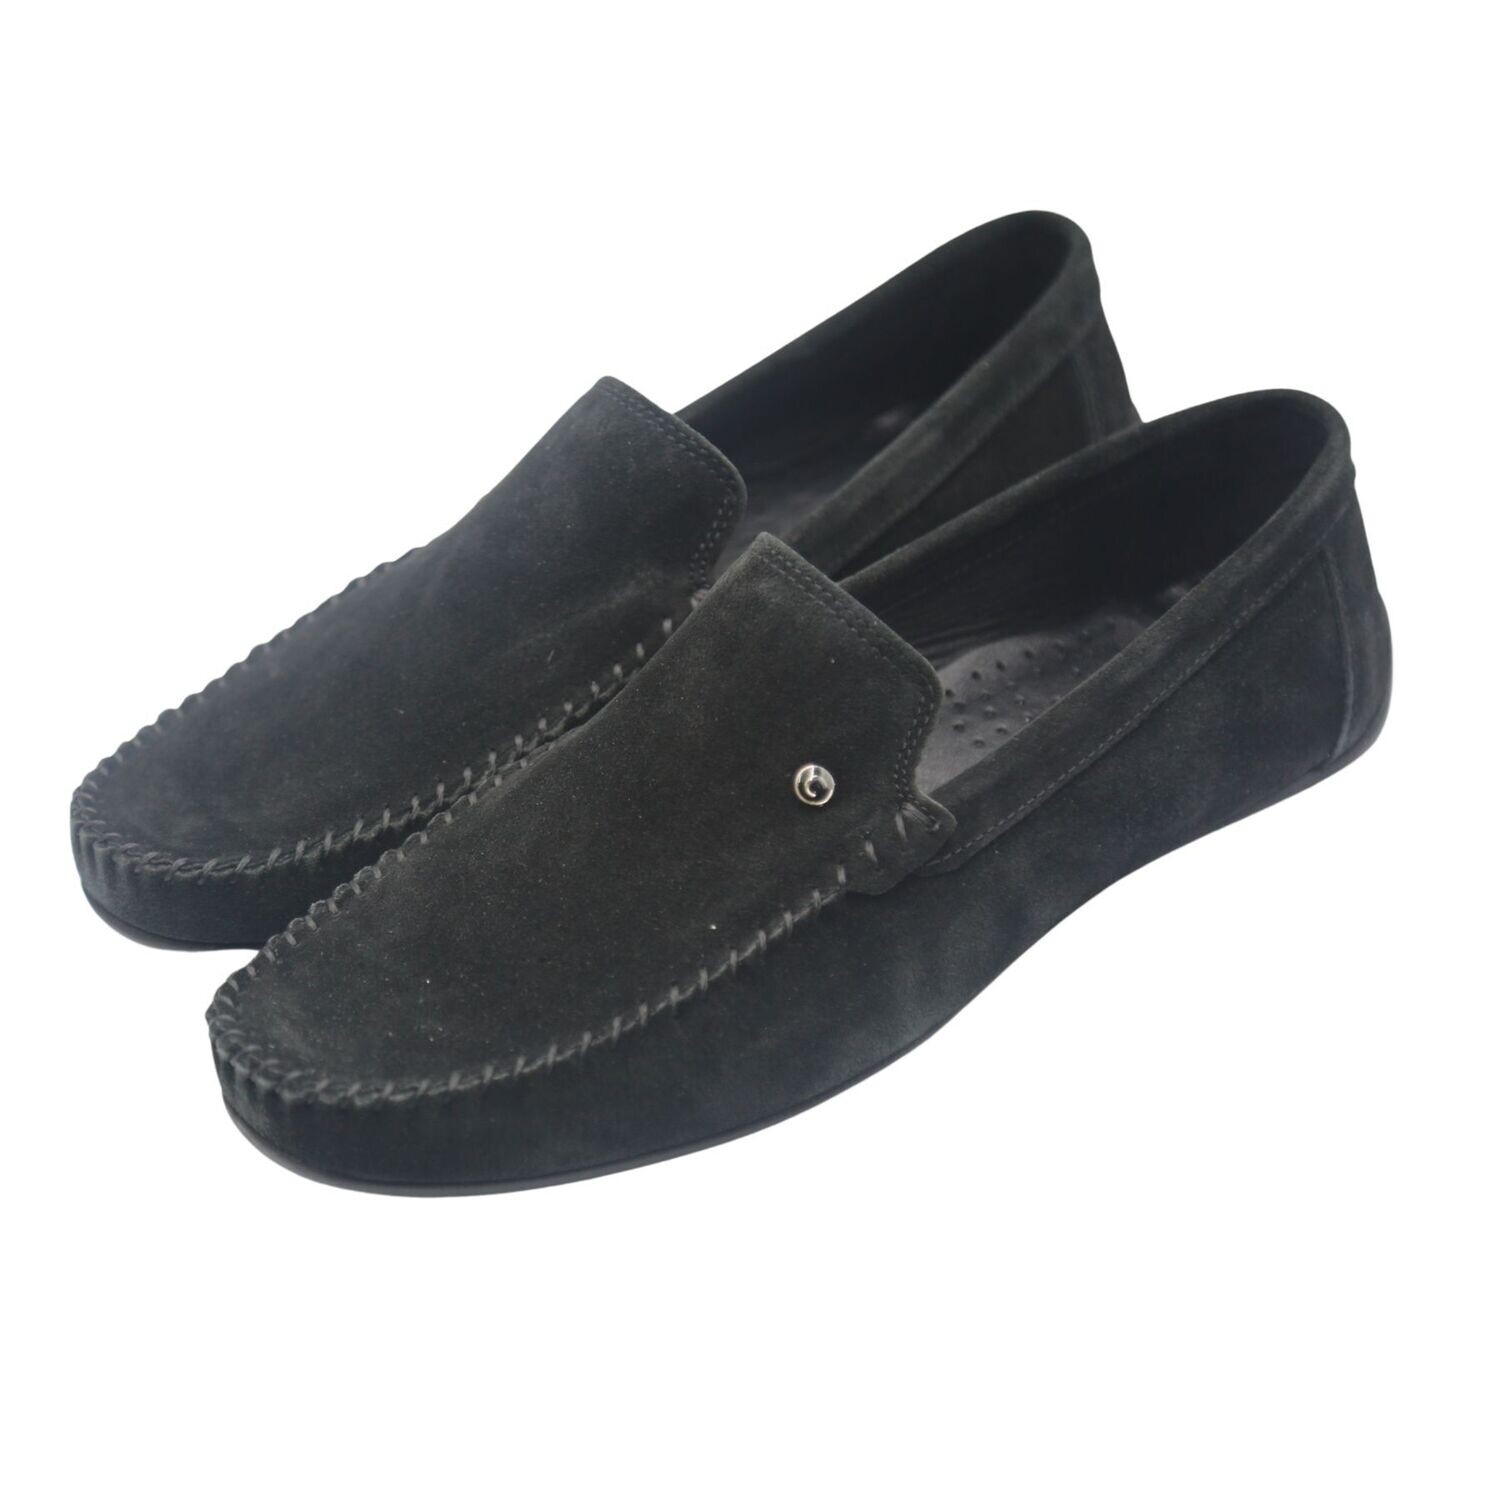 100% pure leather loafer shoes for men